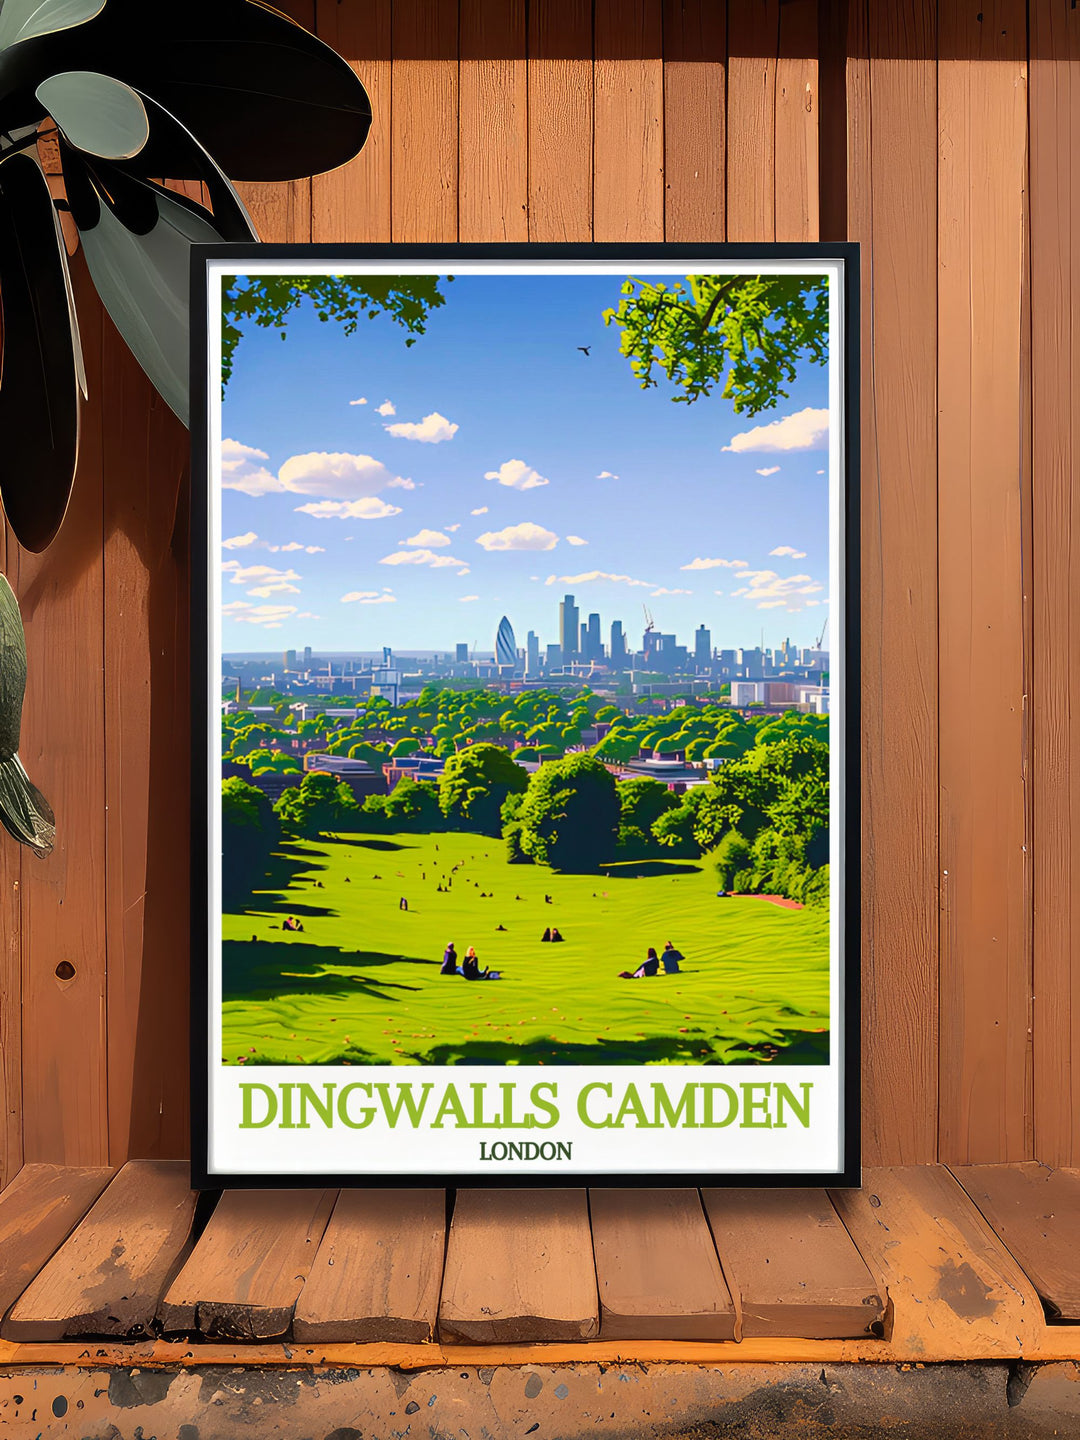 Primrose Hill is beautifully illustrated in this travel poster, capturing its peaceful retreat and stunning city views, perfect for enhancing any decor.